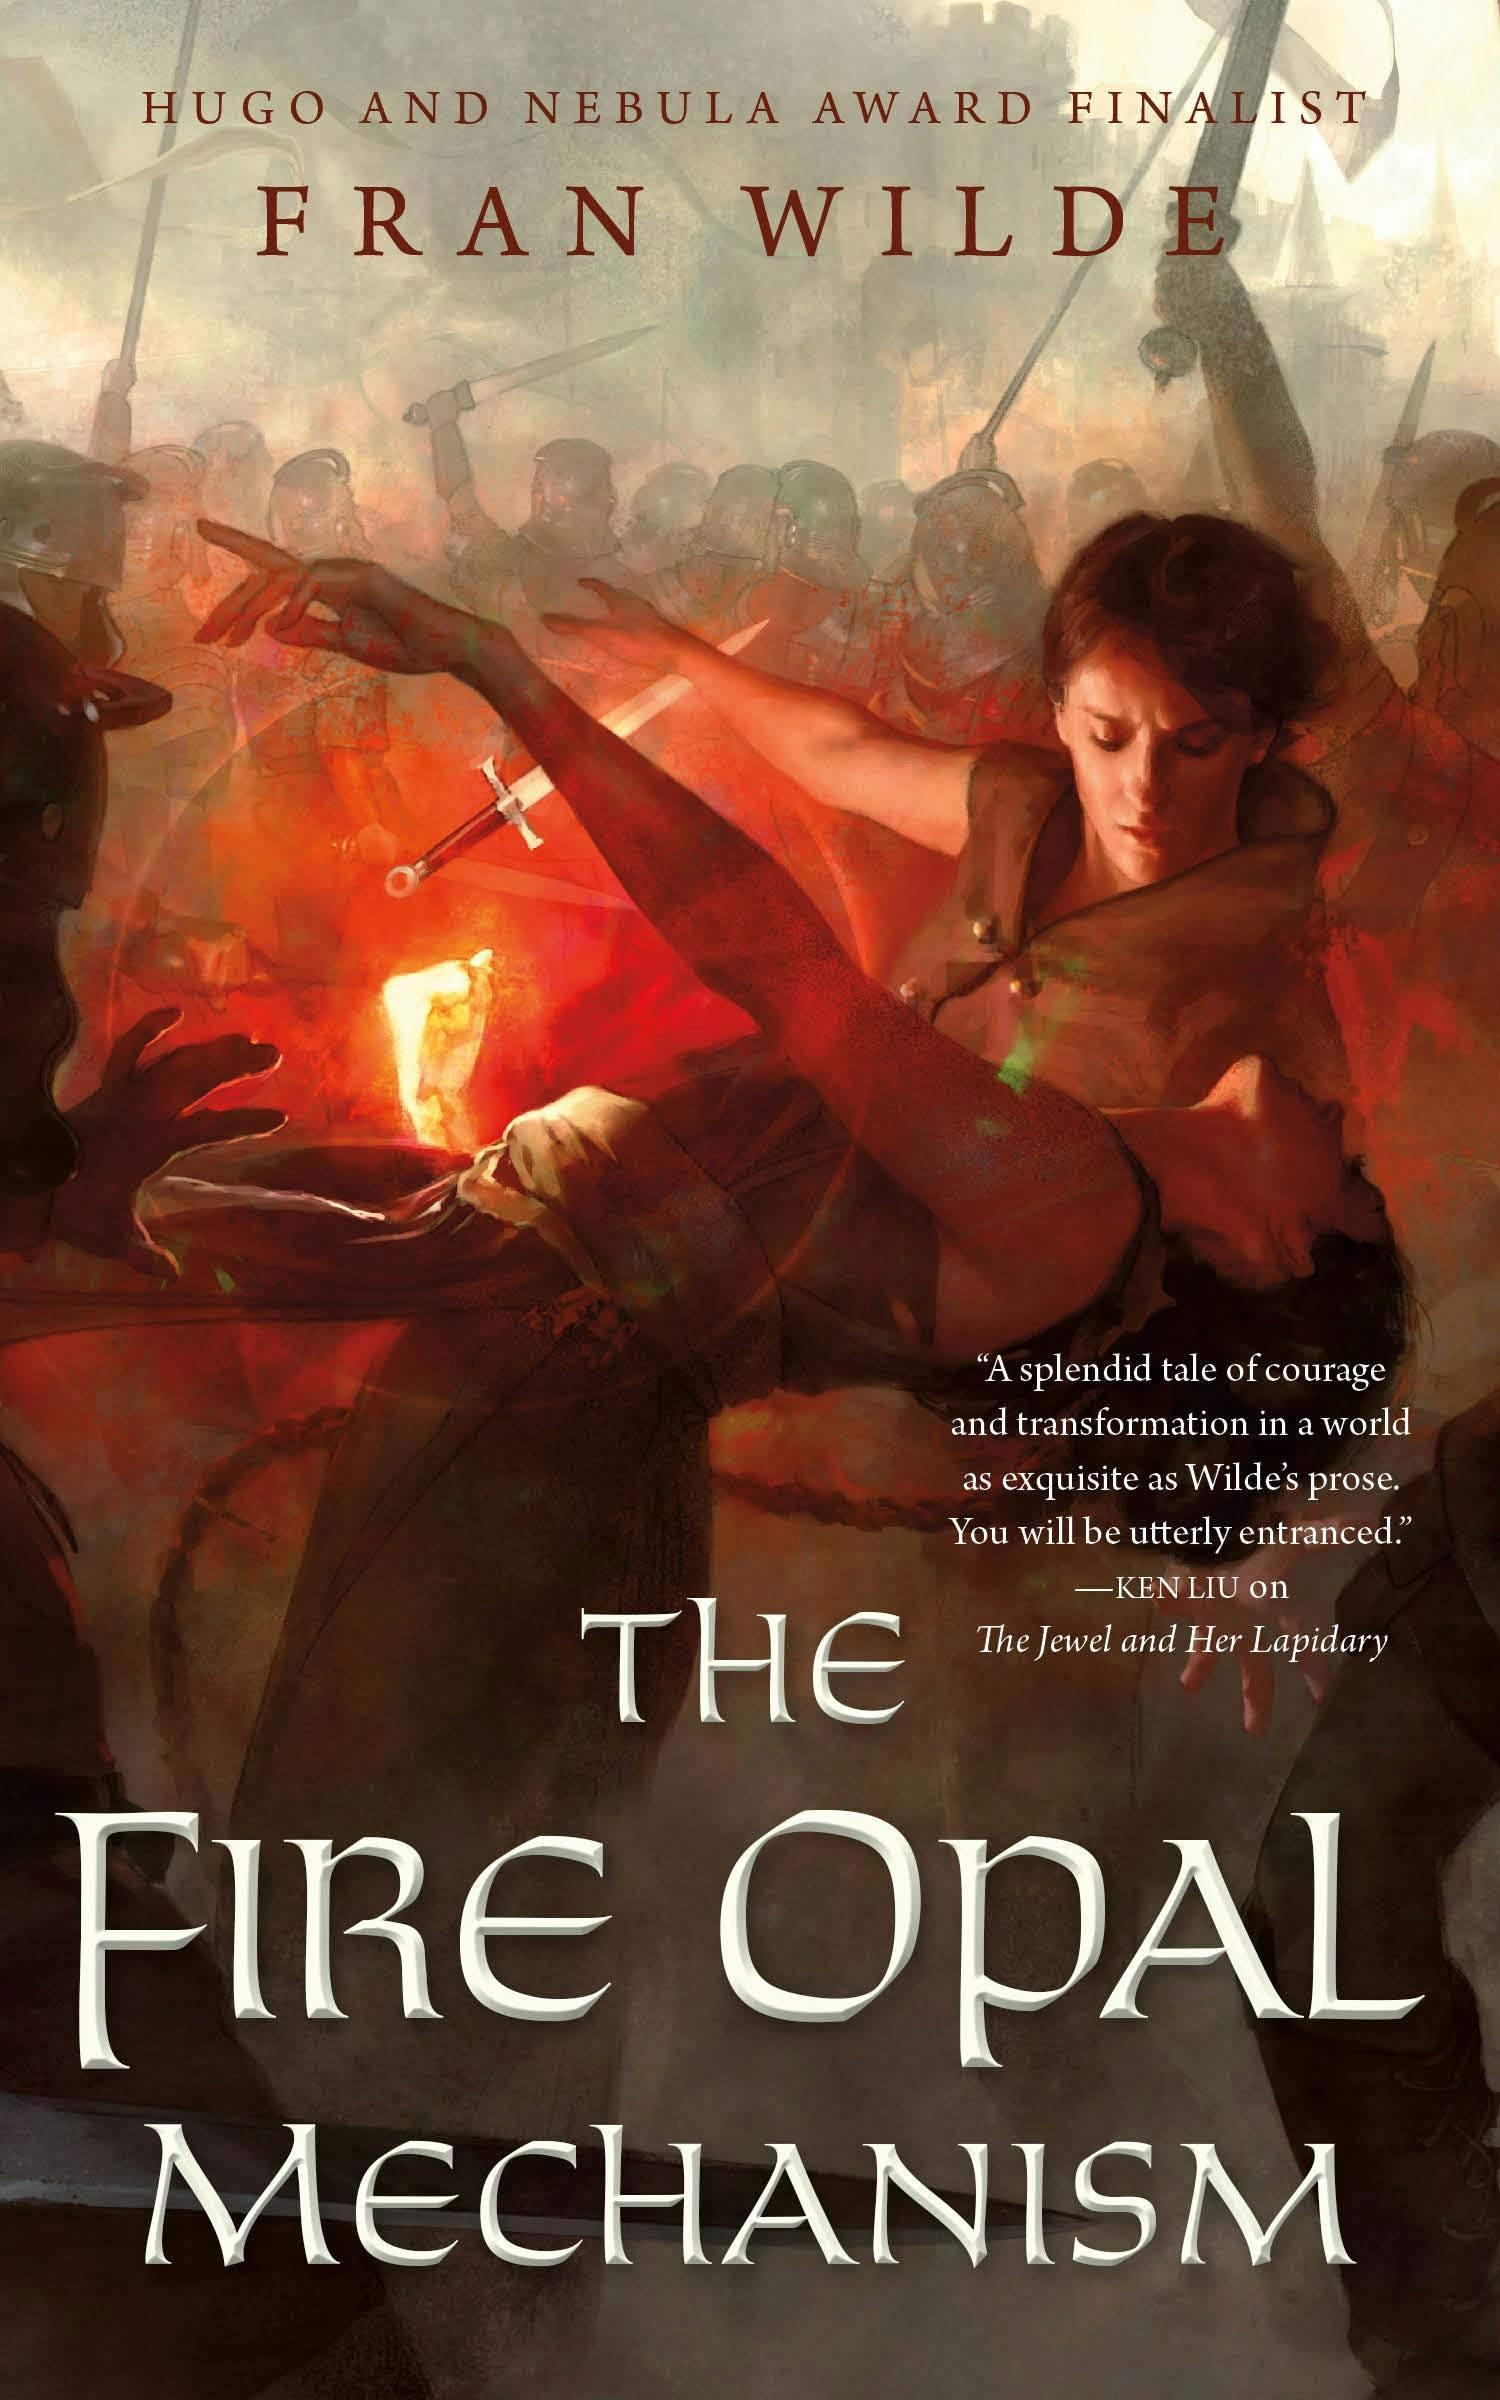 Cover for the book titled as: The Fire Opal Mechanism